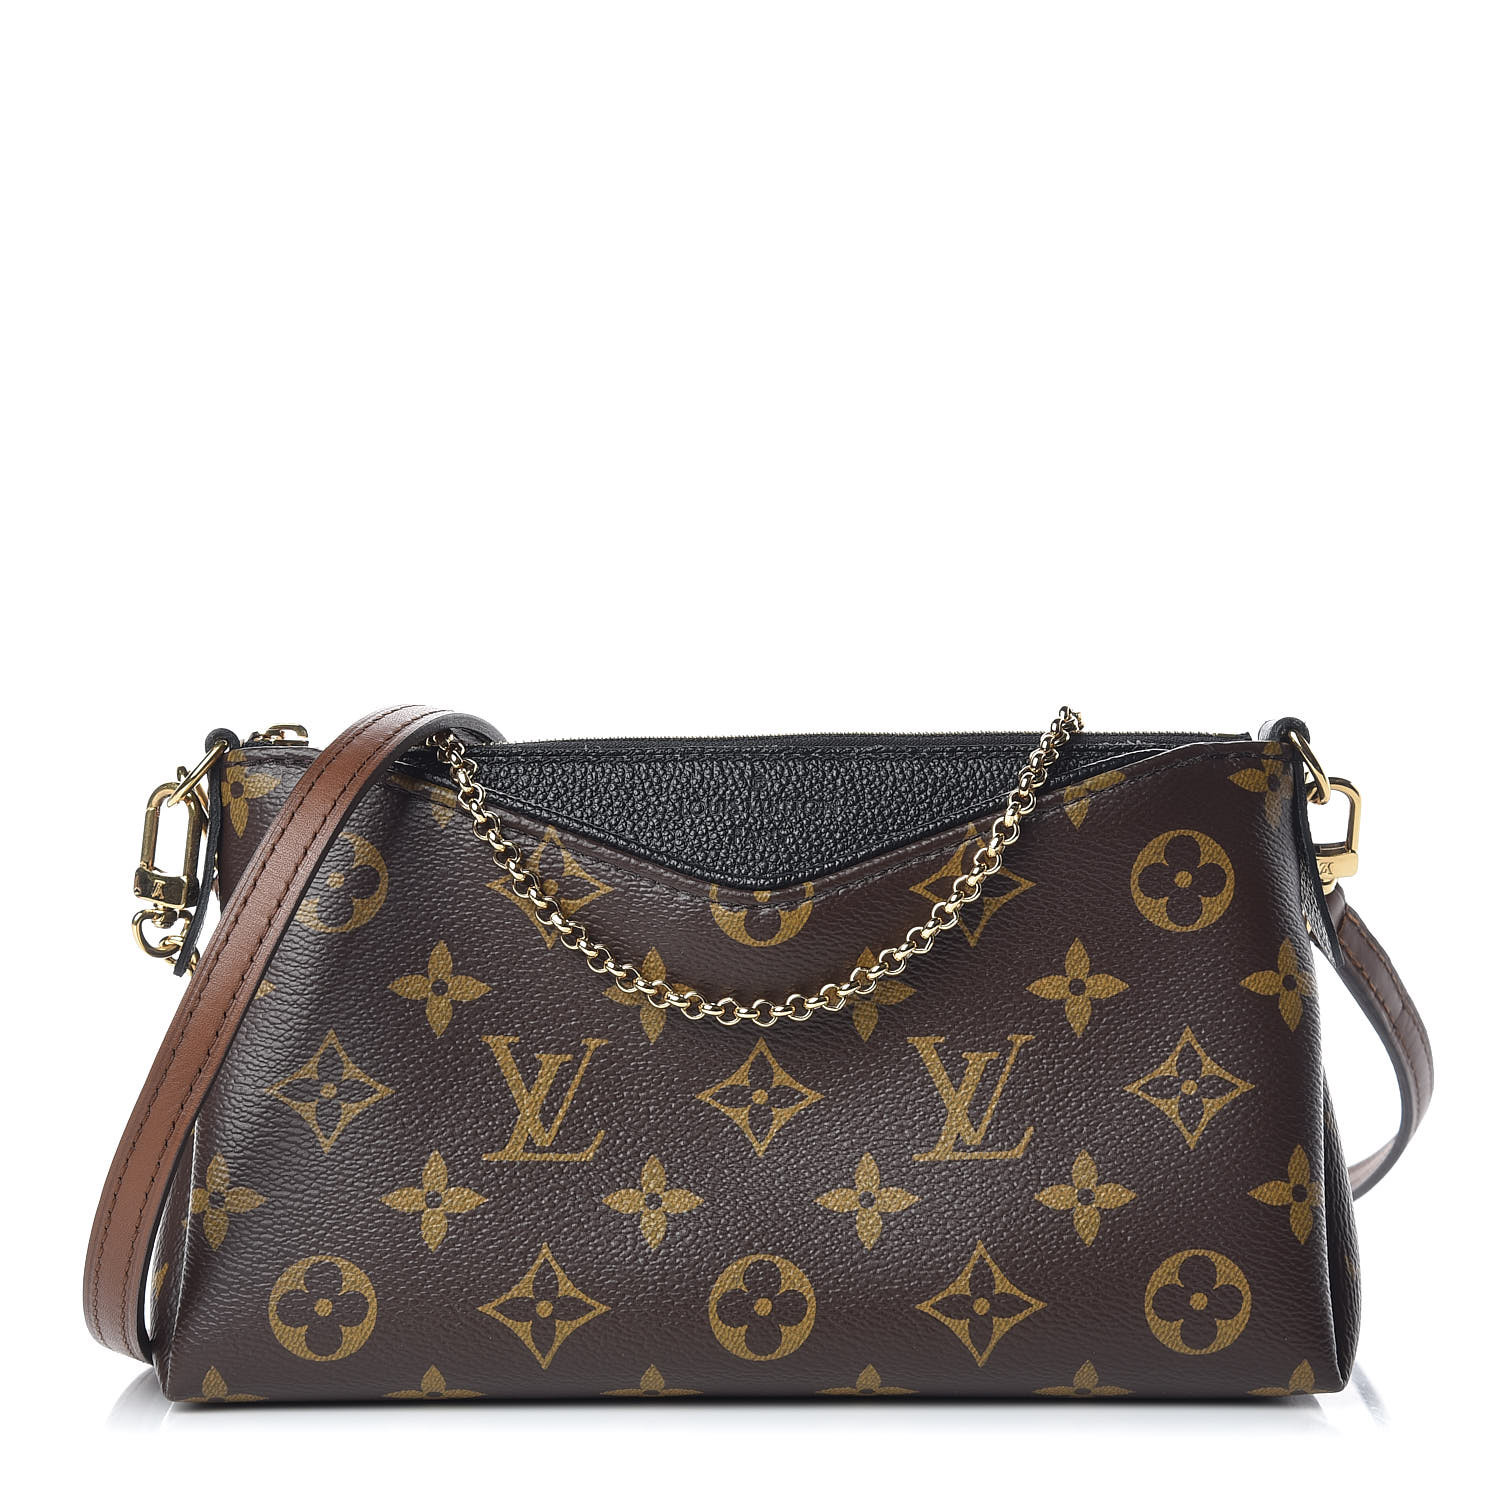 Louis Vuitton What Country  Natural Resource Department